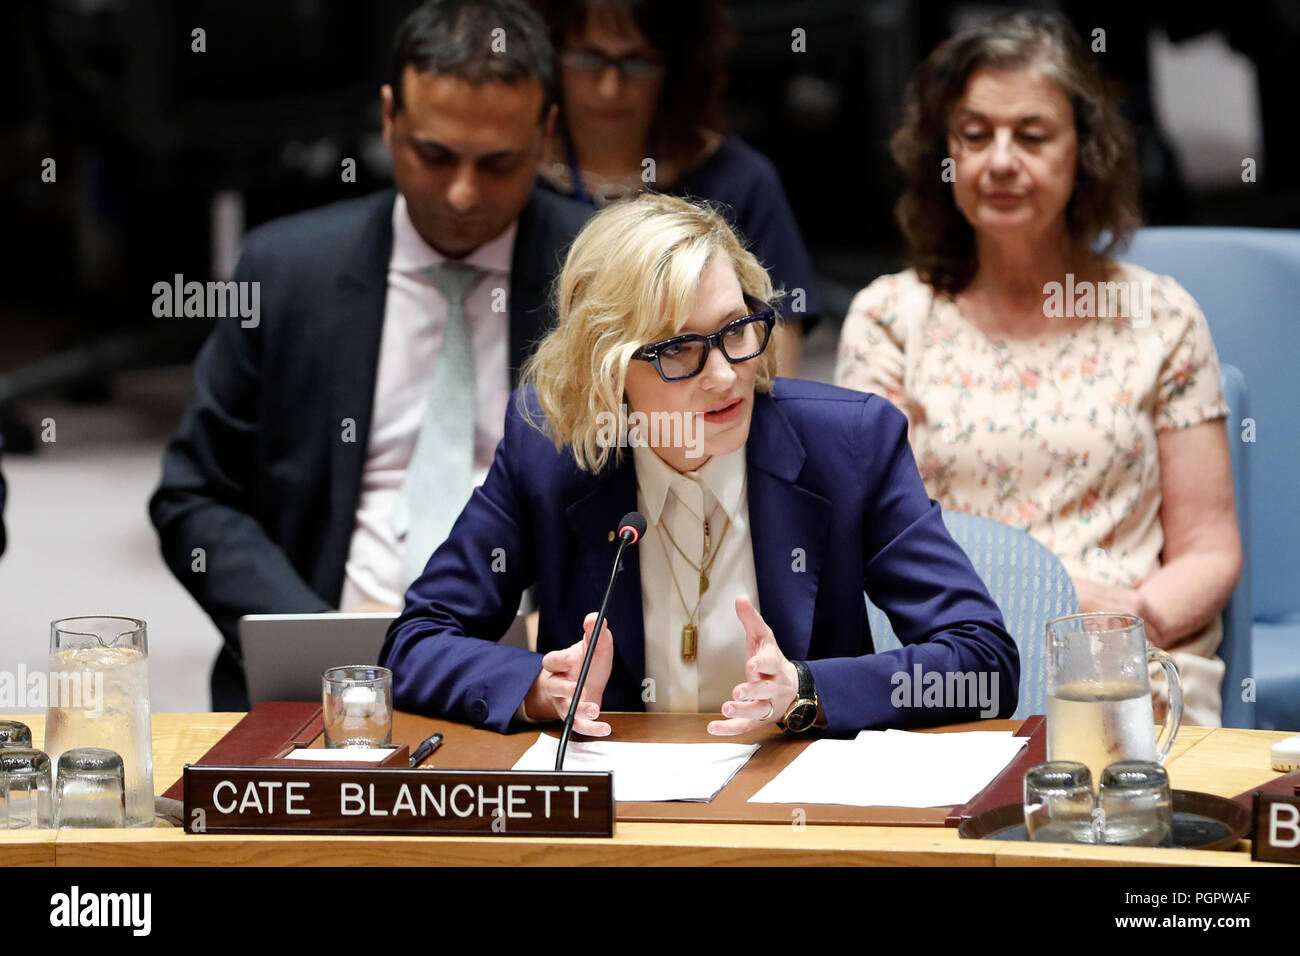 United Nations, UN headquarters in New York. 28th Aug, 2018. Cate Blanchett (front), United Nations Refugee Agency Goodwill Ambassador, addresses the Security Council on the situation in Myanmar and the Rohingya refugee crisis, at the UN headquarters in New York, Aug. 28, 2018. Cate Blanchett on Tuesday asked for efforts to help Rohingya refugees in Bangladesh and to create the right conditions for their return to Myanmar. Credit: Li Muzi/Xinhua/Alamy Live News Stock Photo